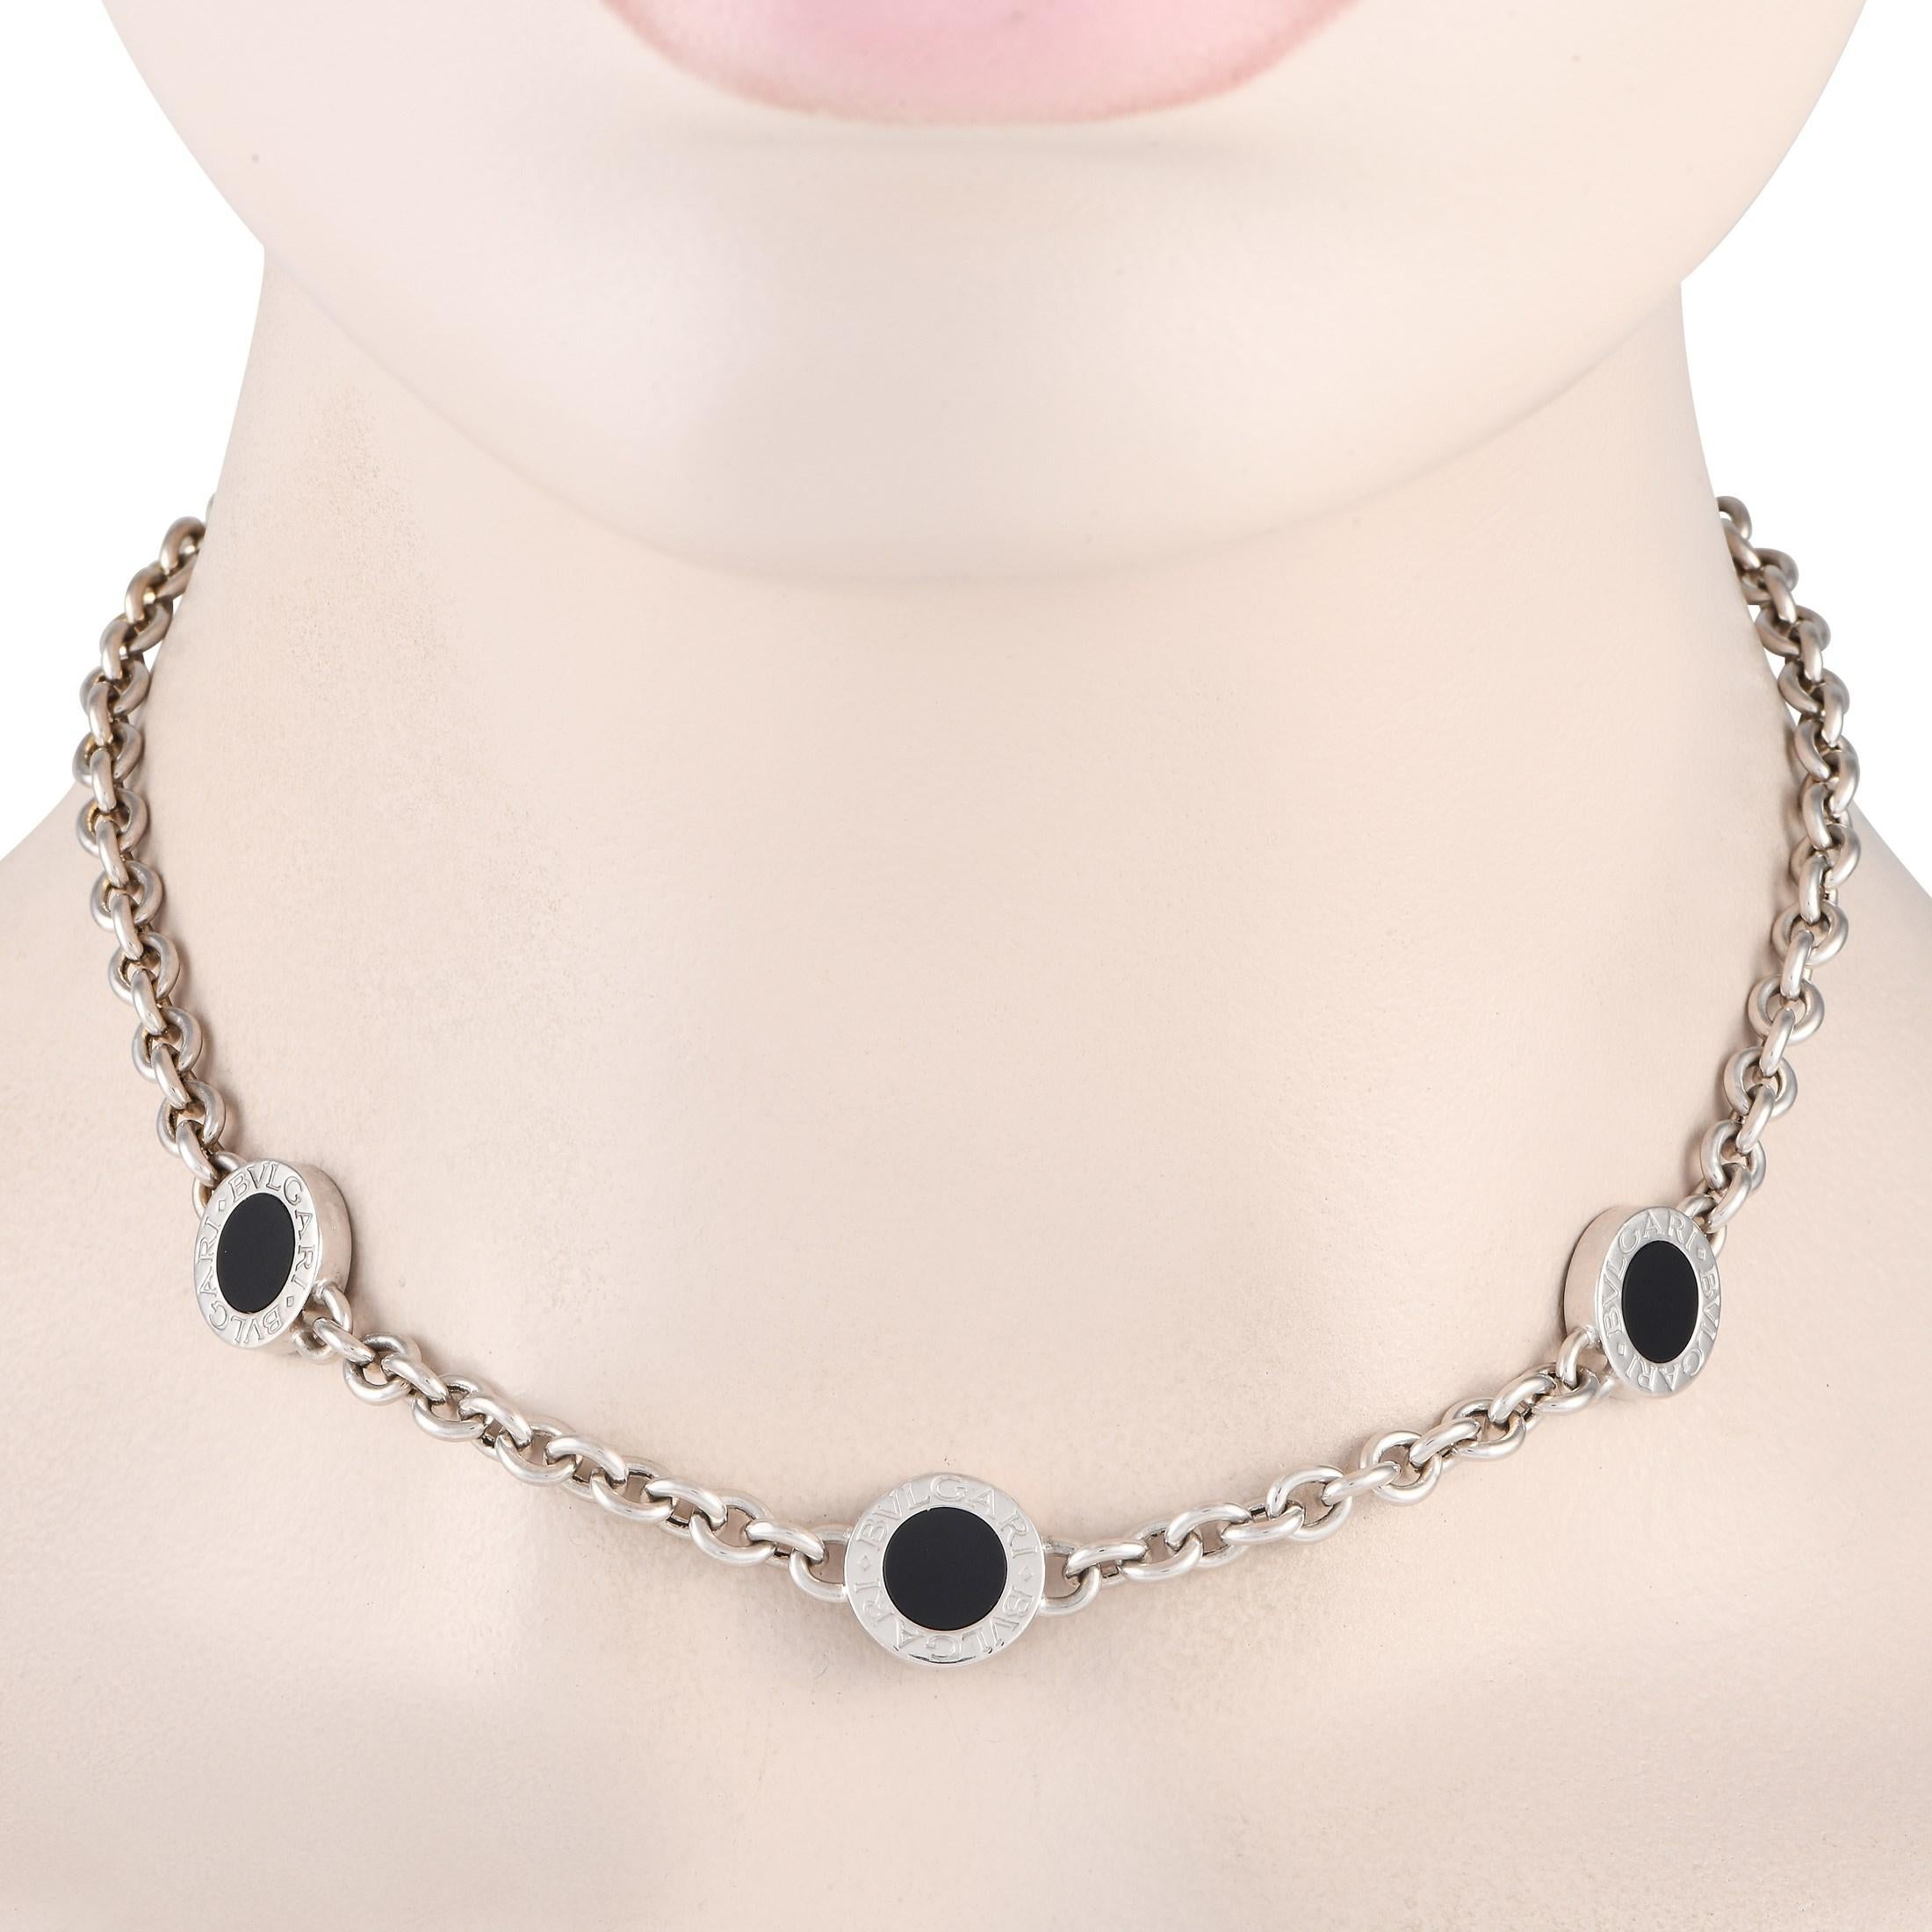 A statement-making round chain link necklace to add to your collection. This piece from Bvlgari features a thick chain link necklace punctuated with three Bvlgari Bvlgari discs, each with a round onyx inlay. The chain measures 15.5 inches long and